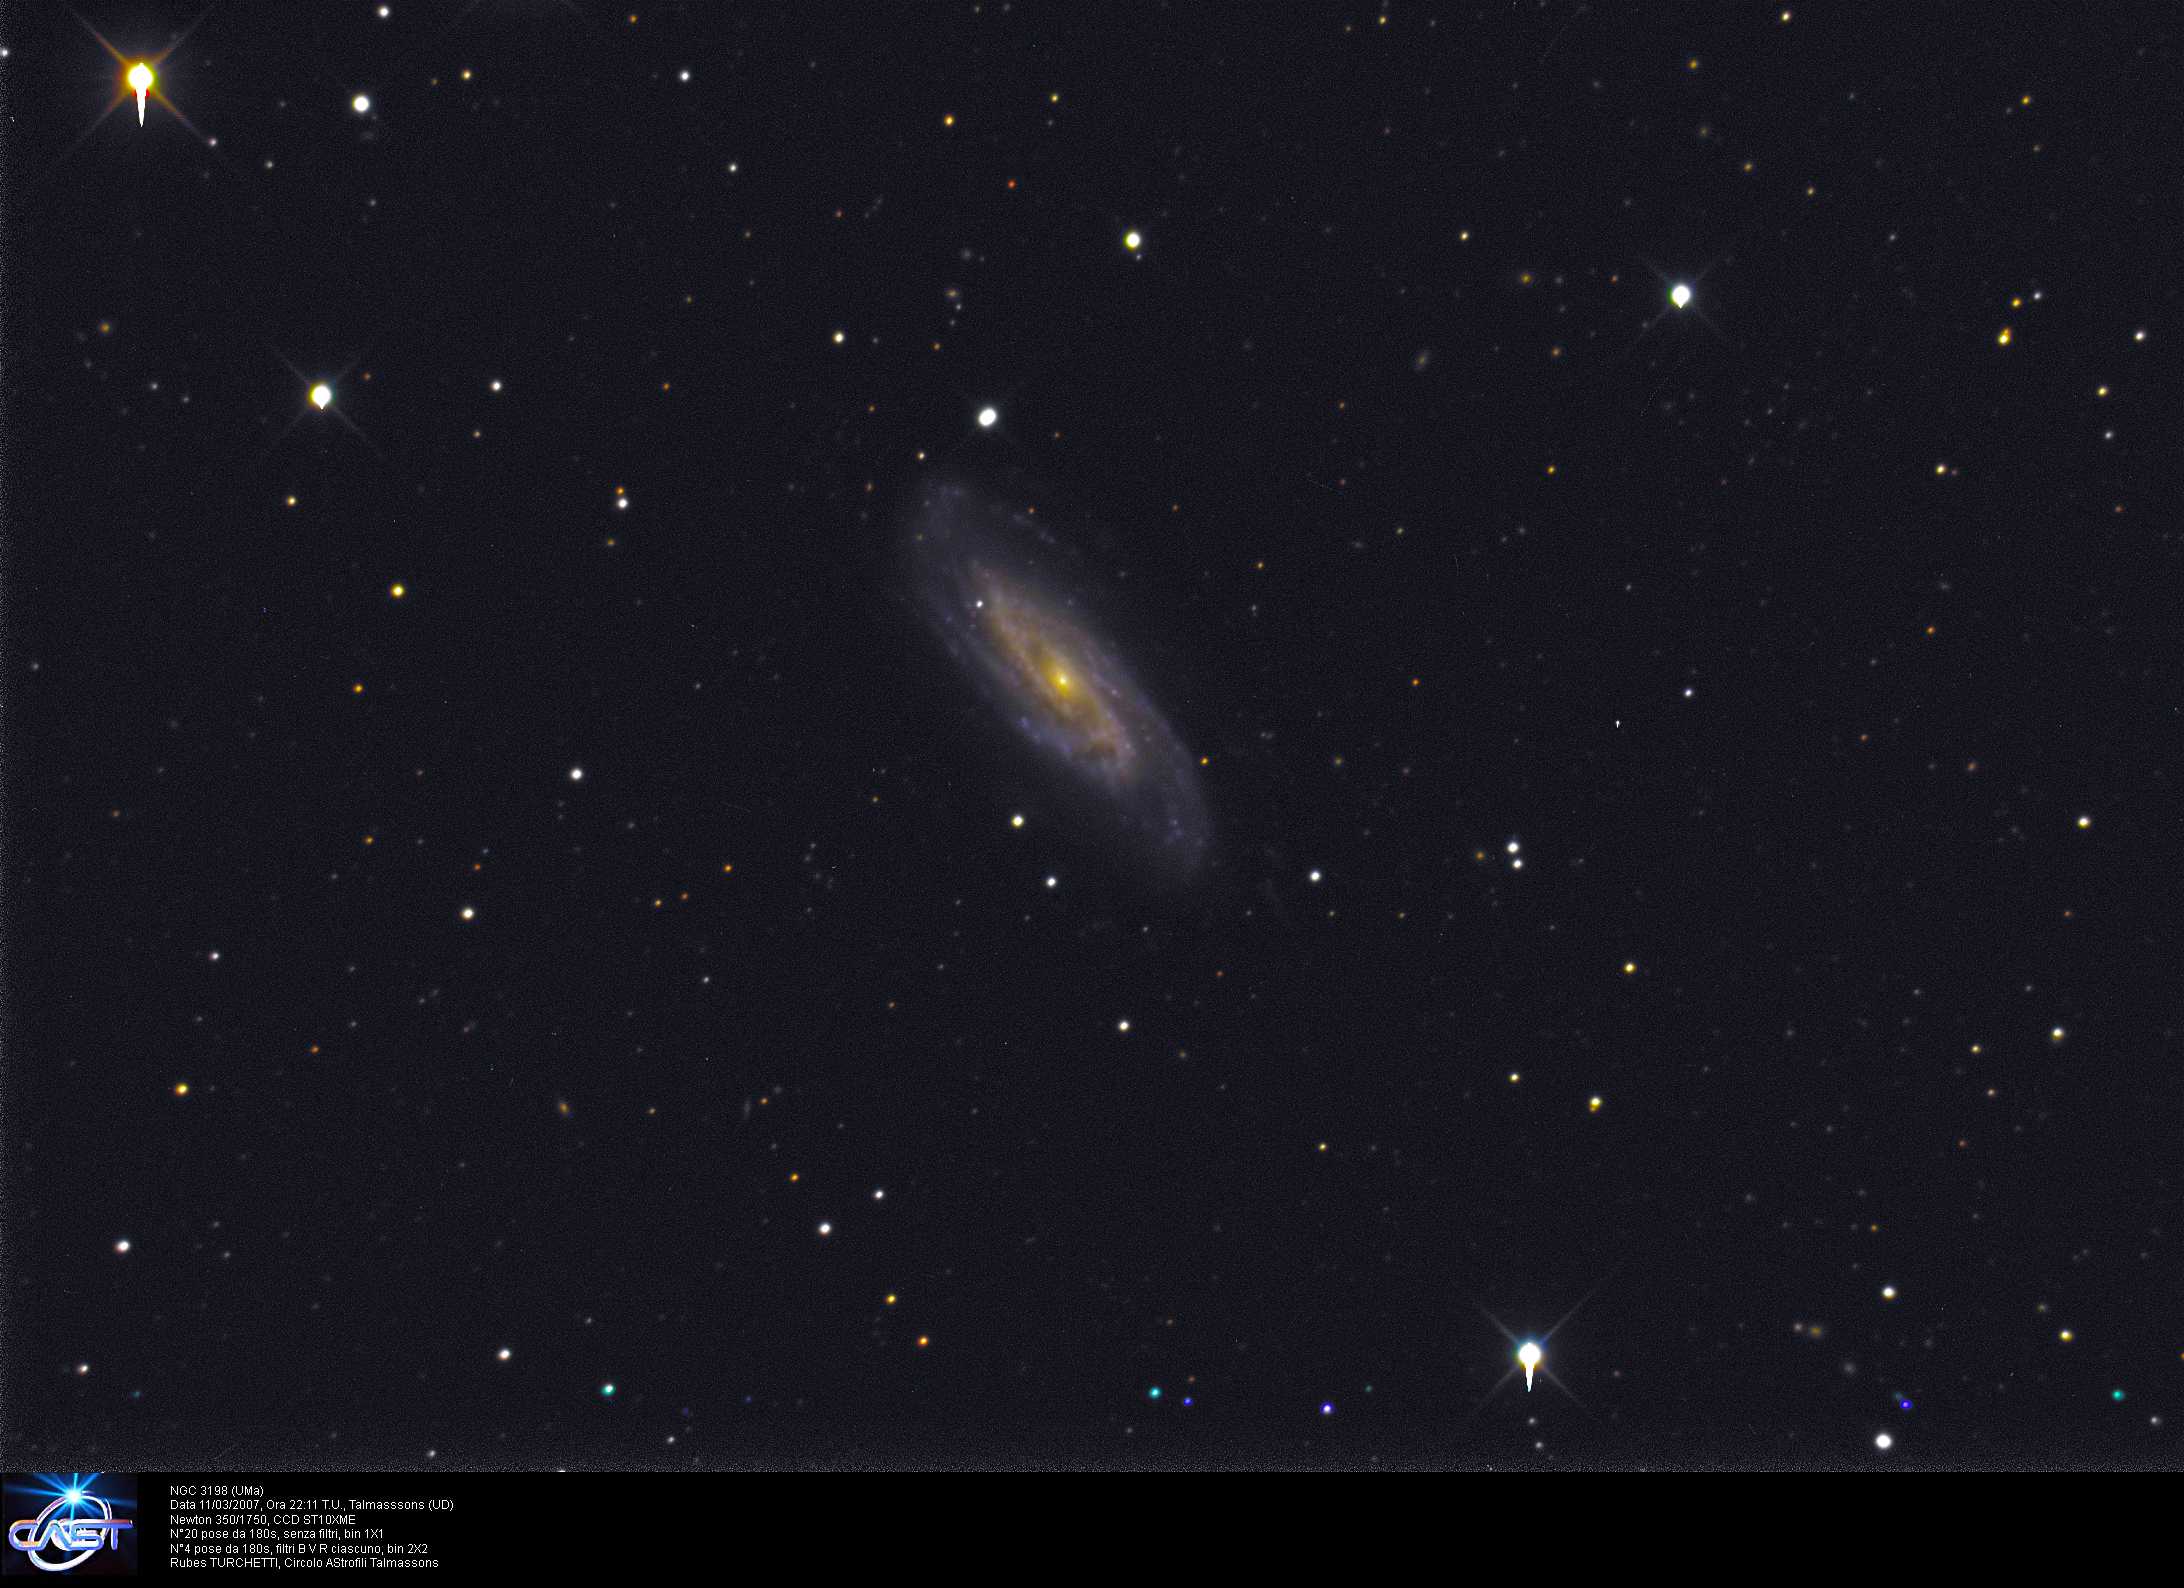 Galaxy NGC 3198: 226 KB; click on the image to enlarge at 2184 x 1588 pixels